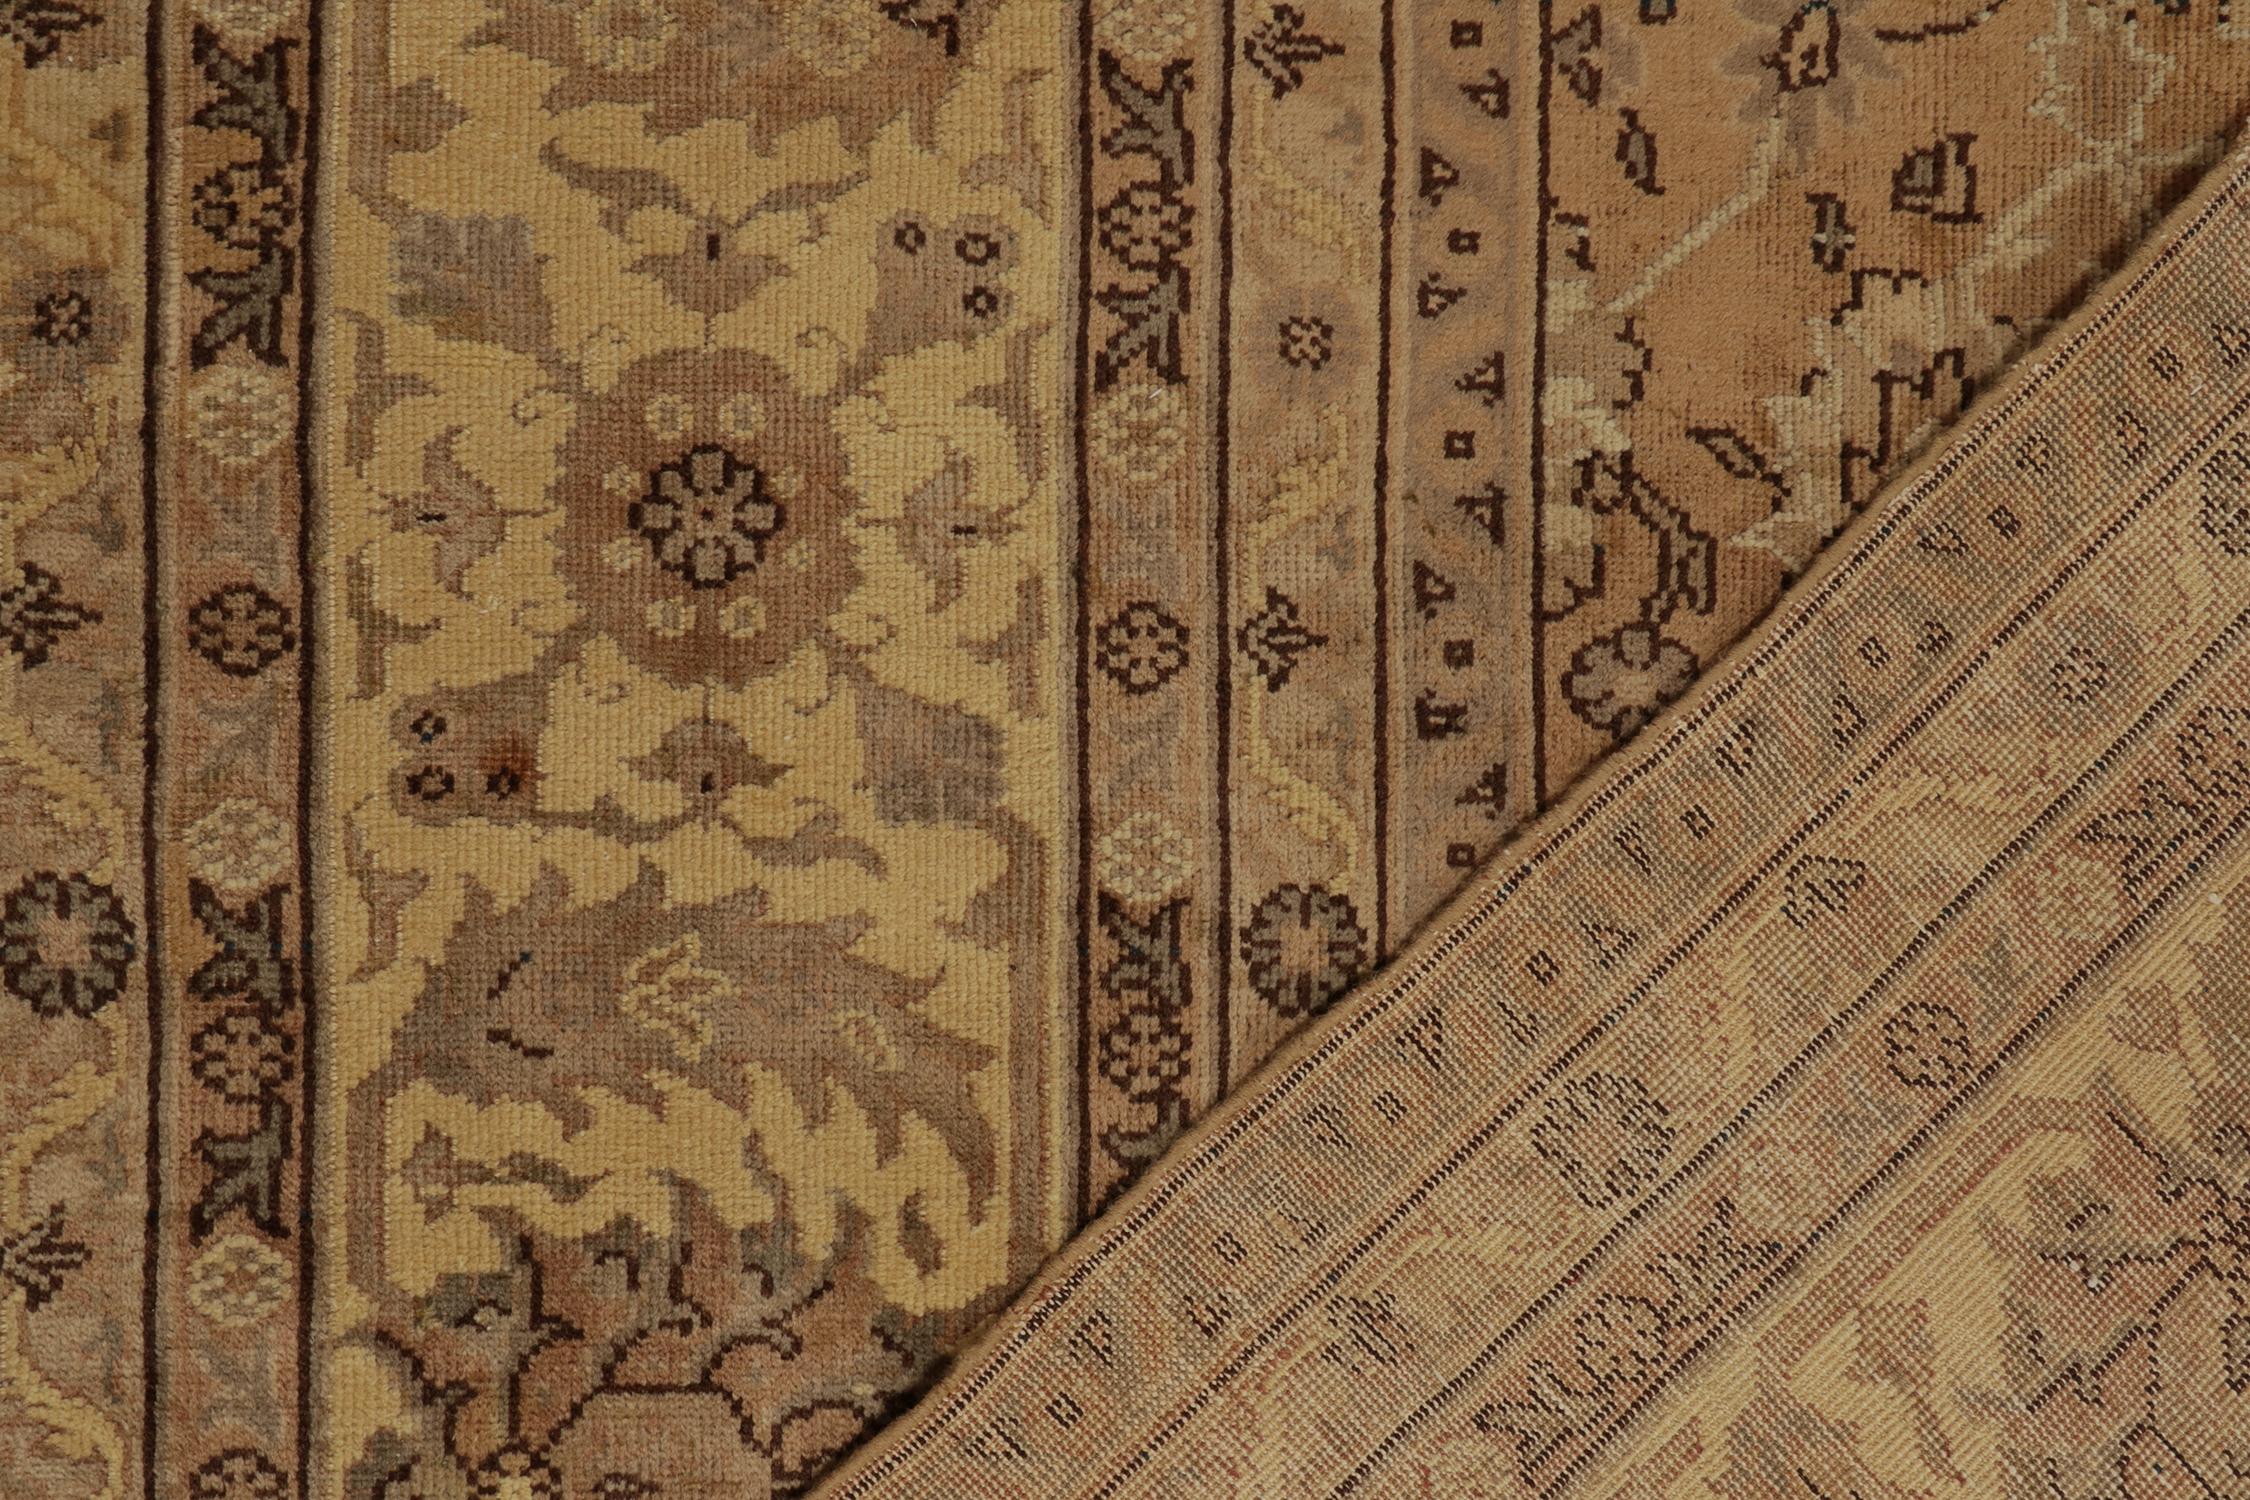 Wool Antique Persian Rug in Beige-Brown and Gold Floral Patterns by Rug & Kilim For Sale